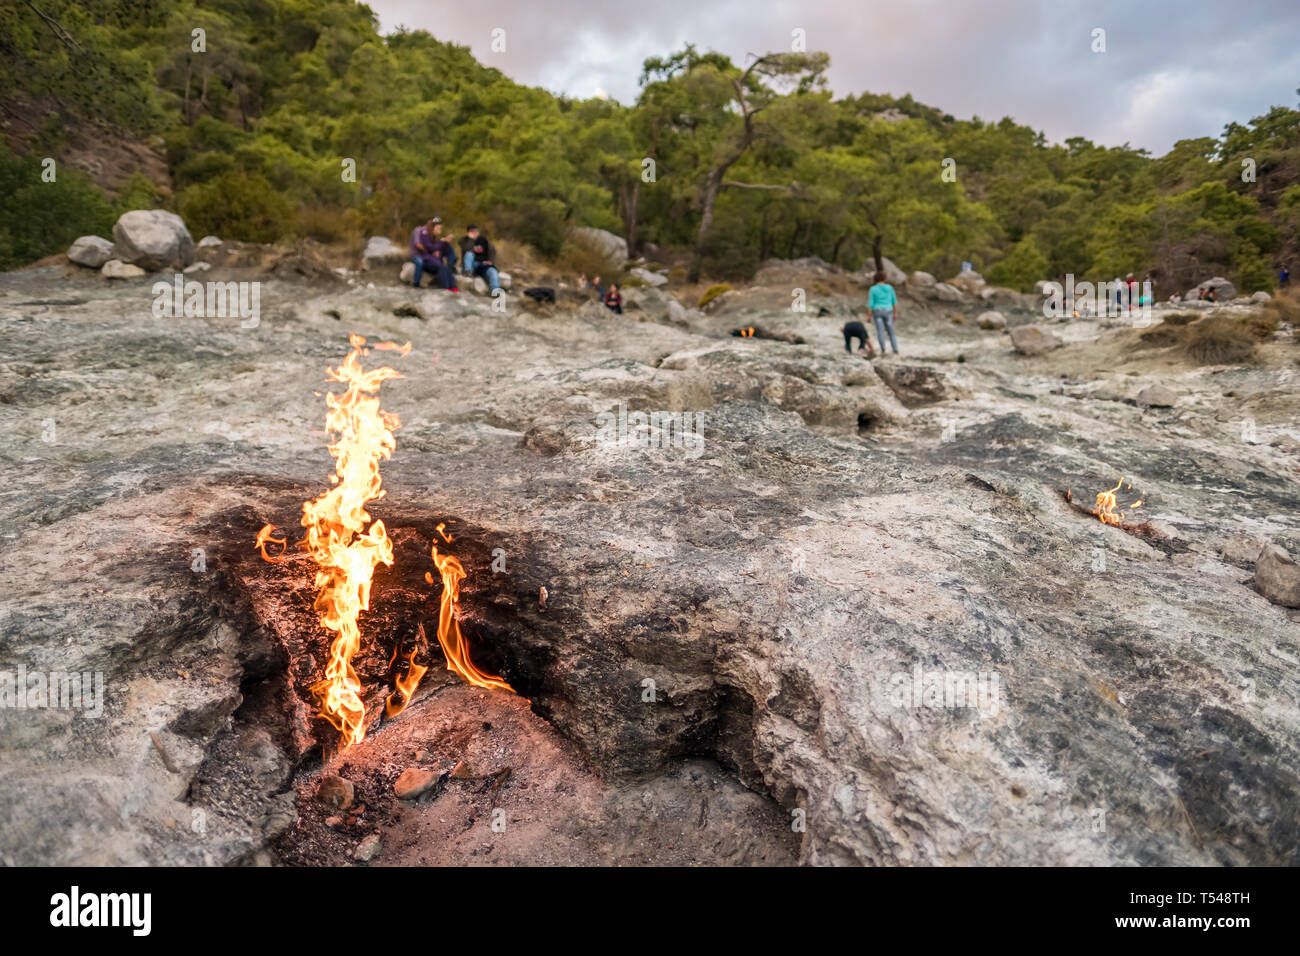 Flames of Chimera Mount from the underground. Fire from the natural gas in the rocks in Cirali, Turkey. Stock Photo